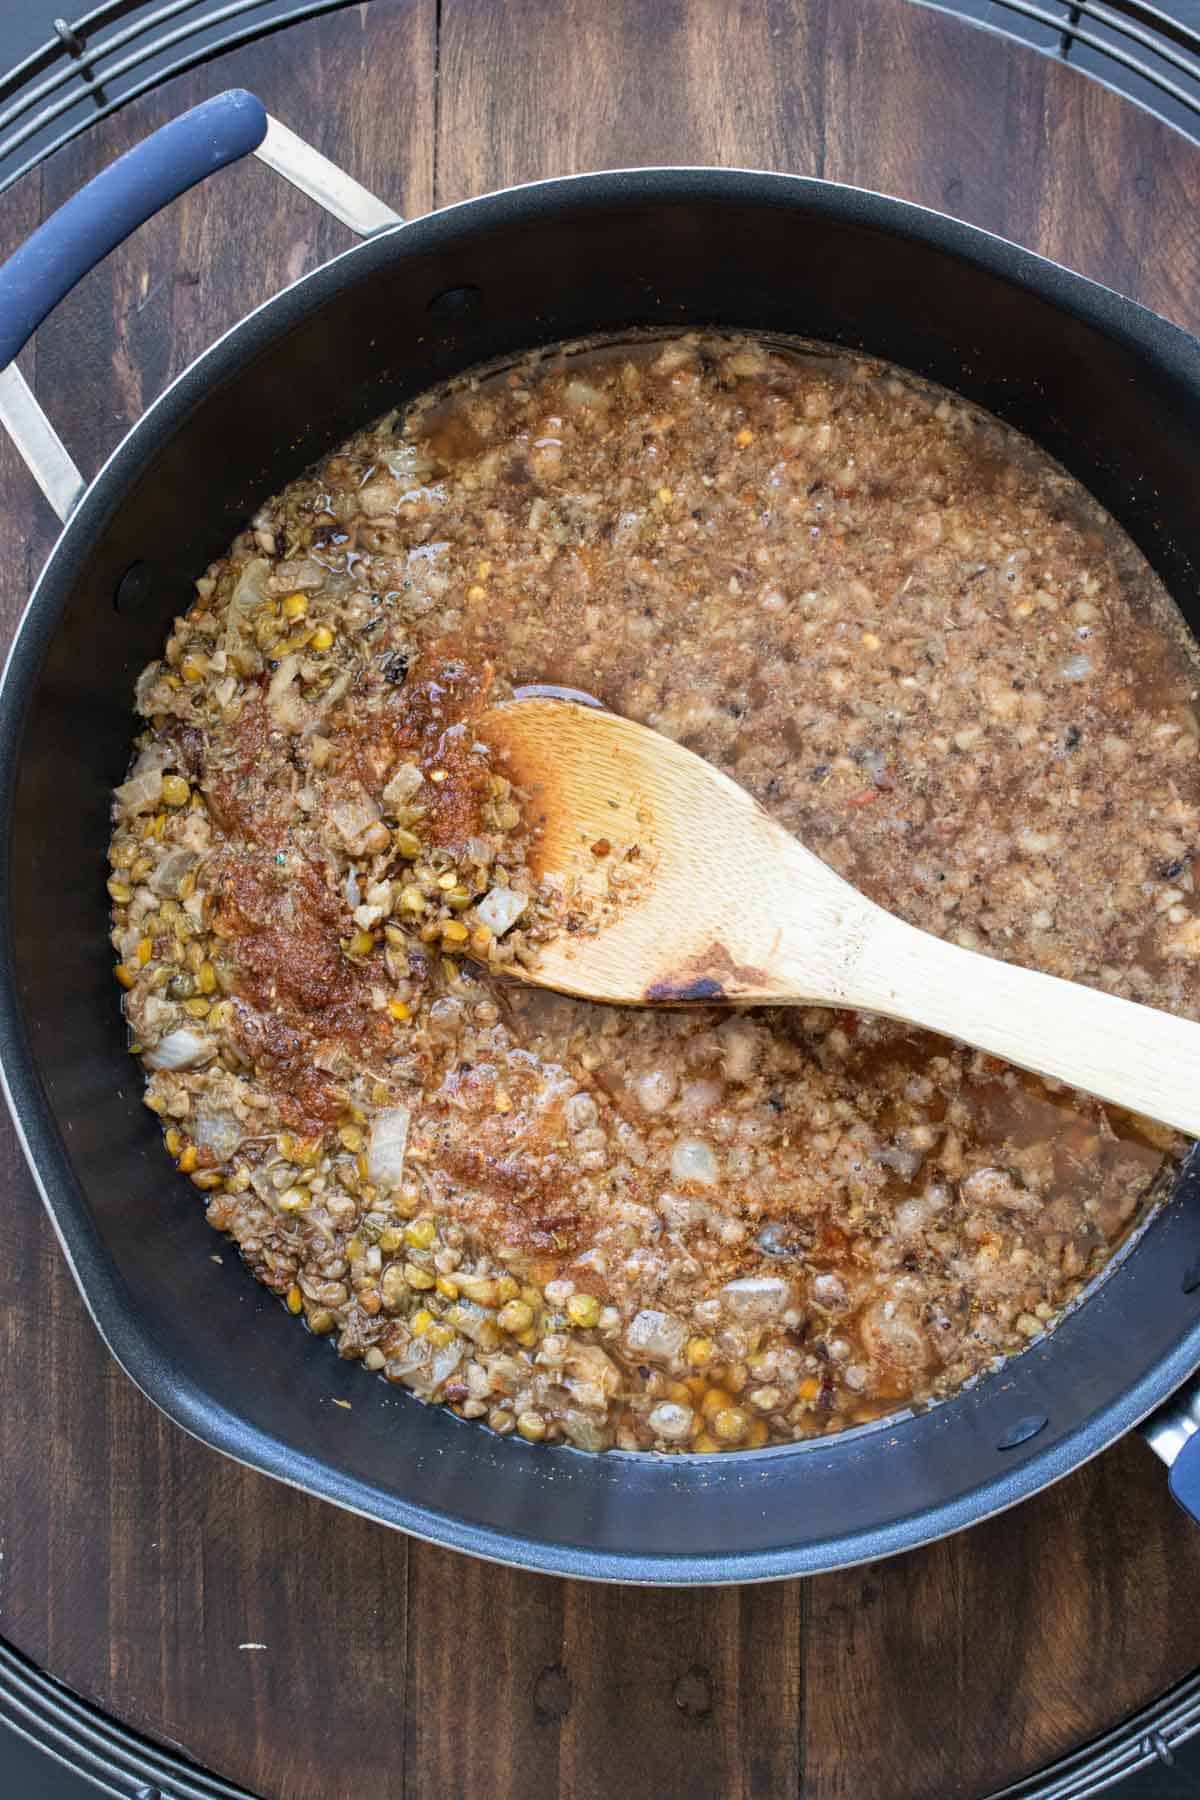 Wooden spoon mixing a bean and broth mixture in a pan